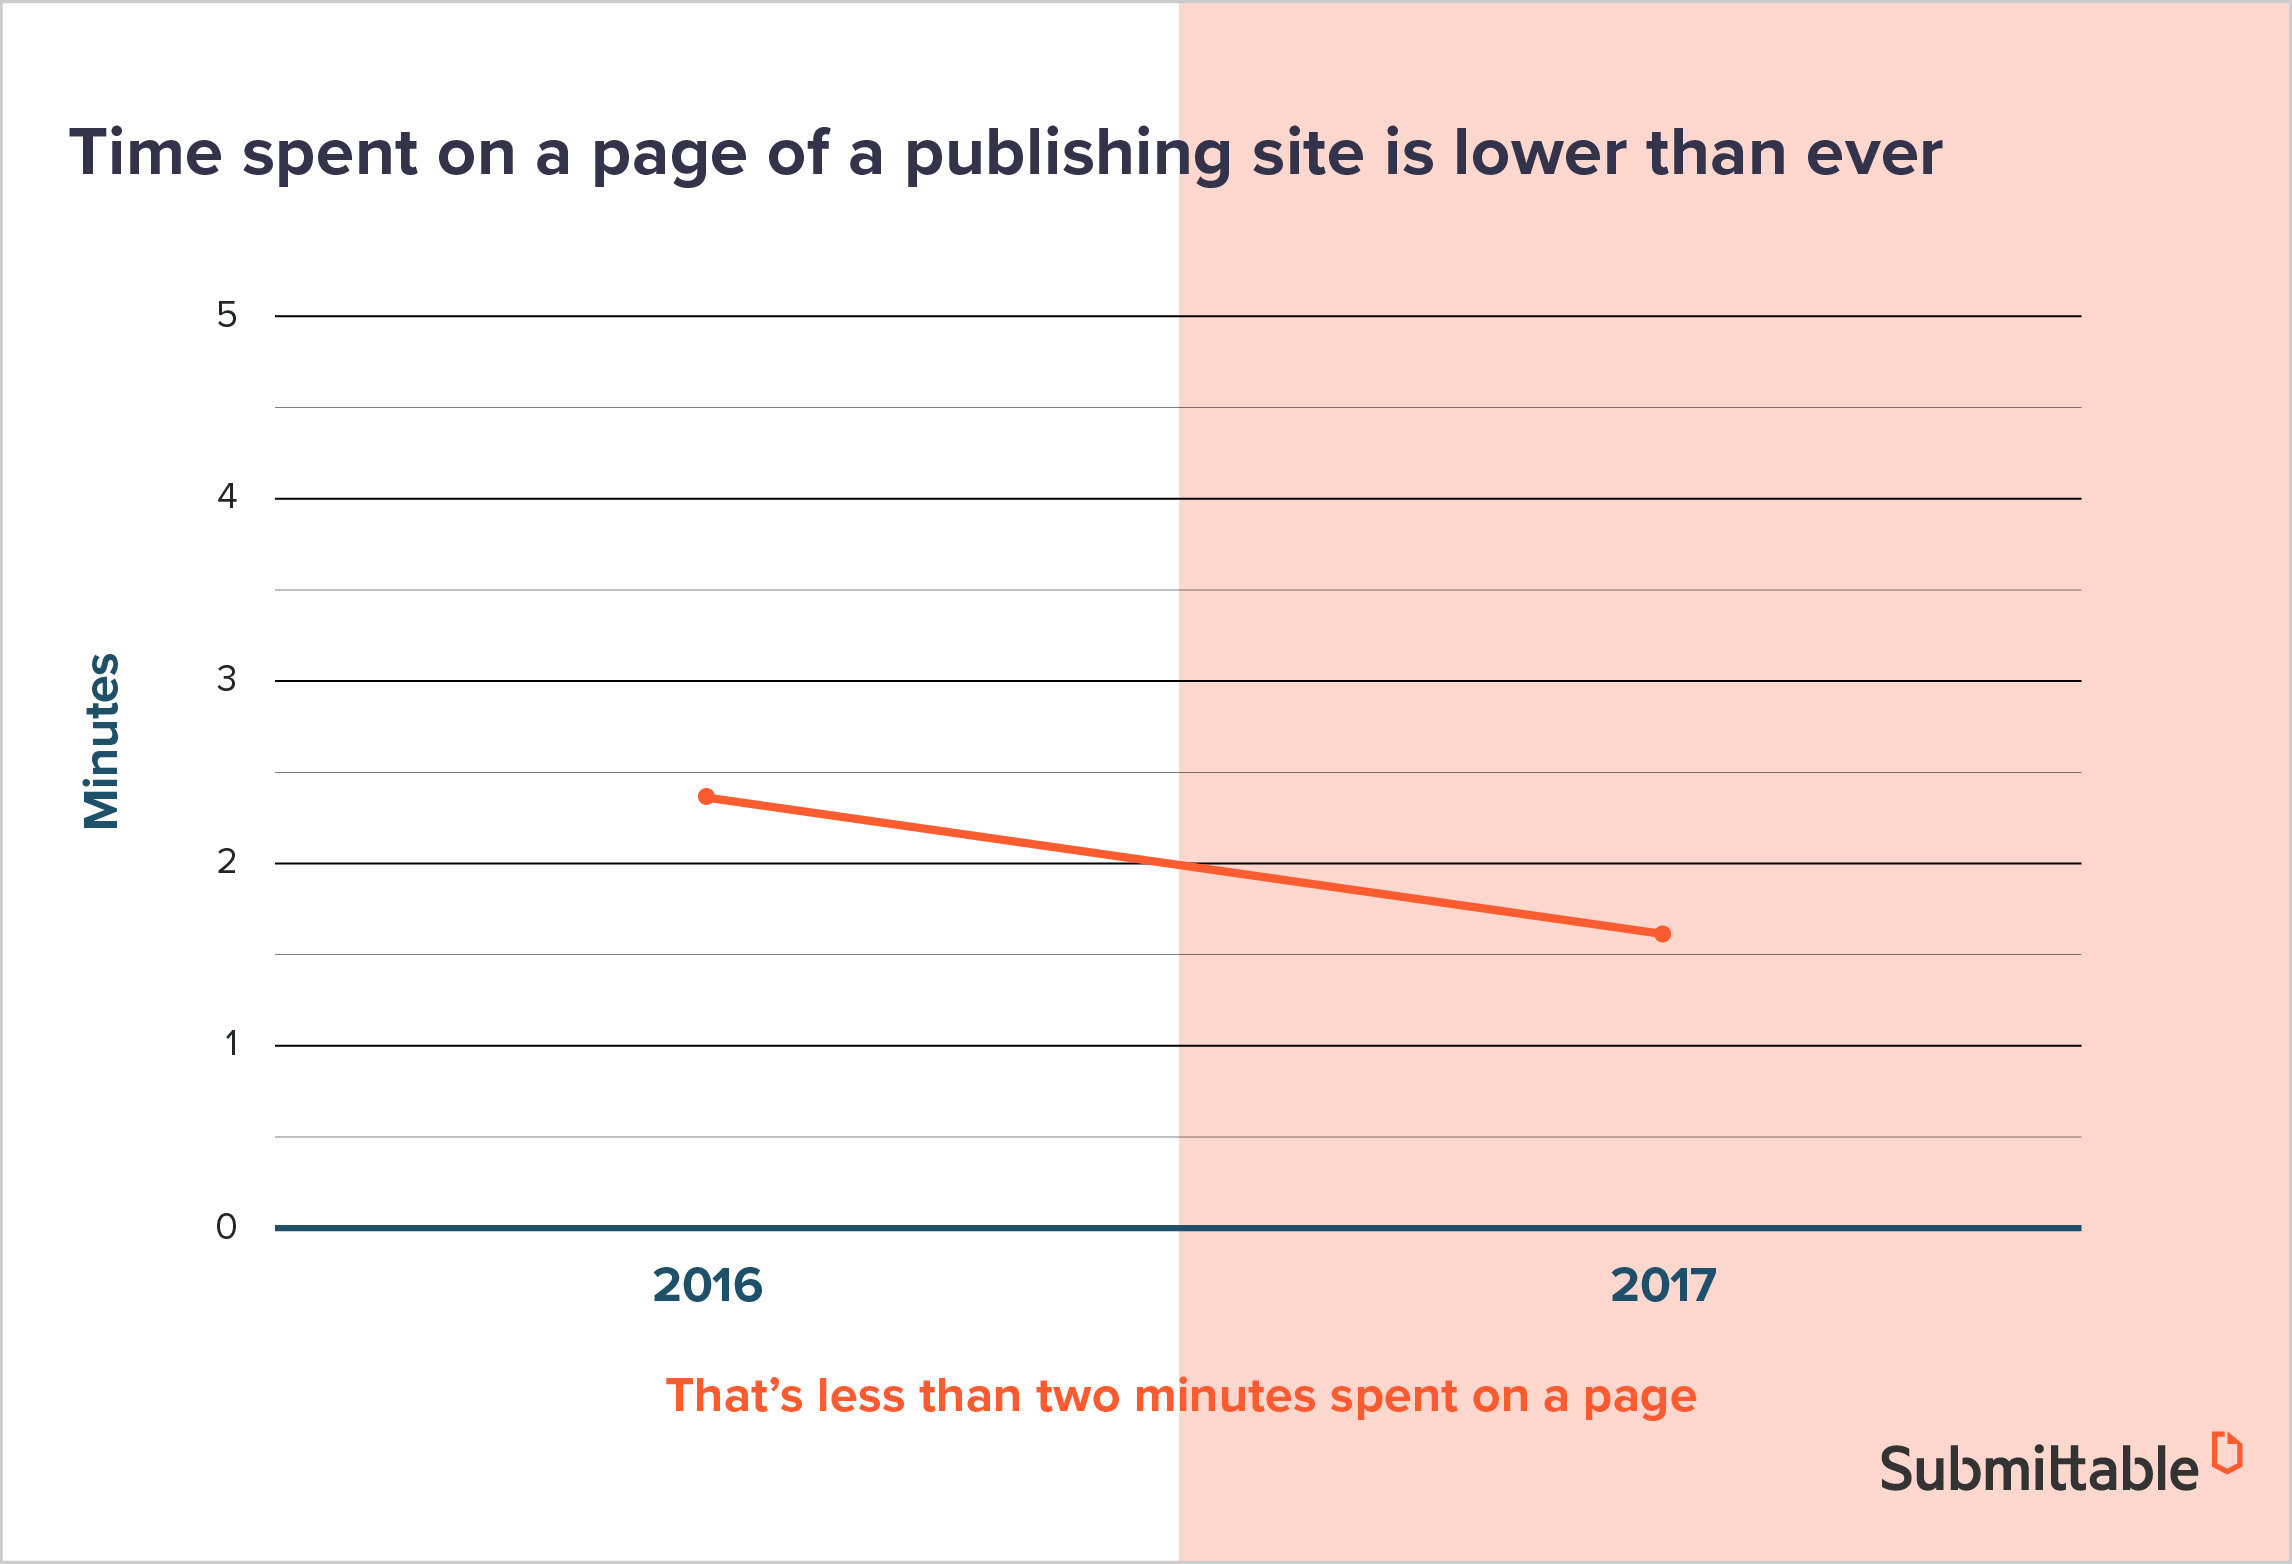 Time spent on a page of a publishing site is lower than ever